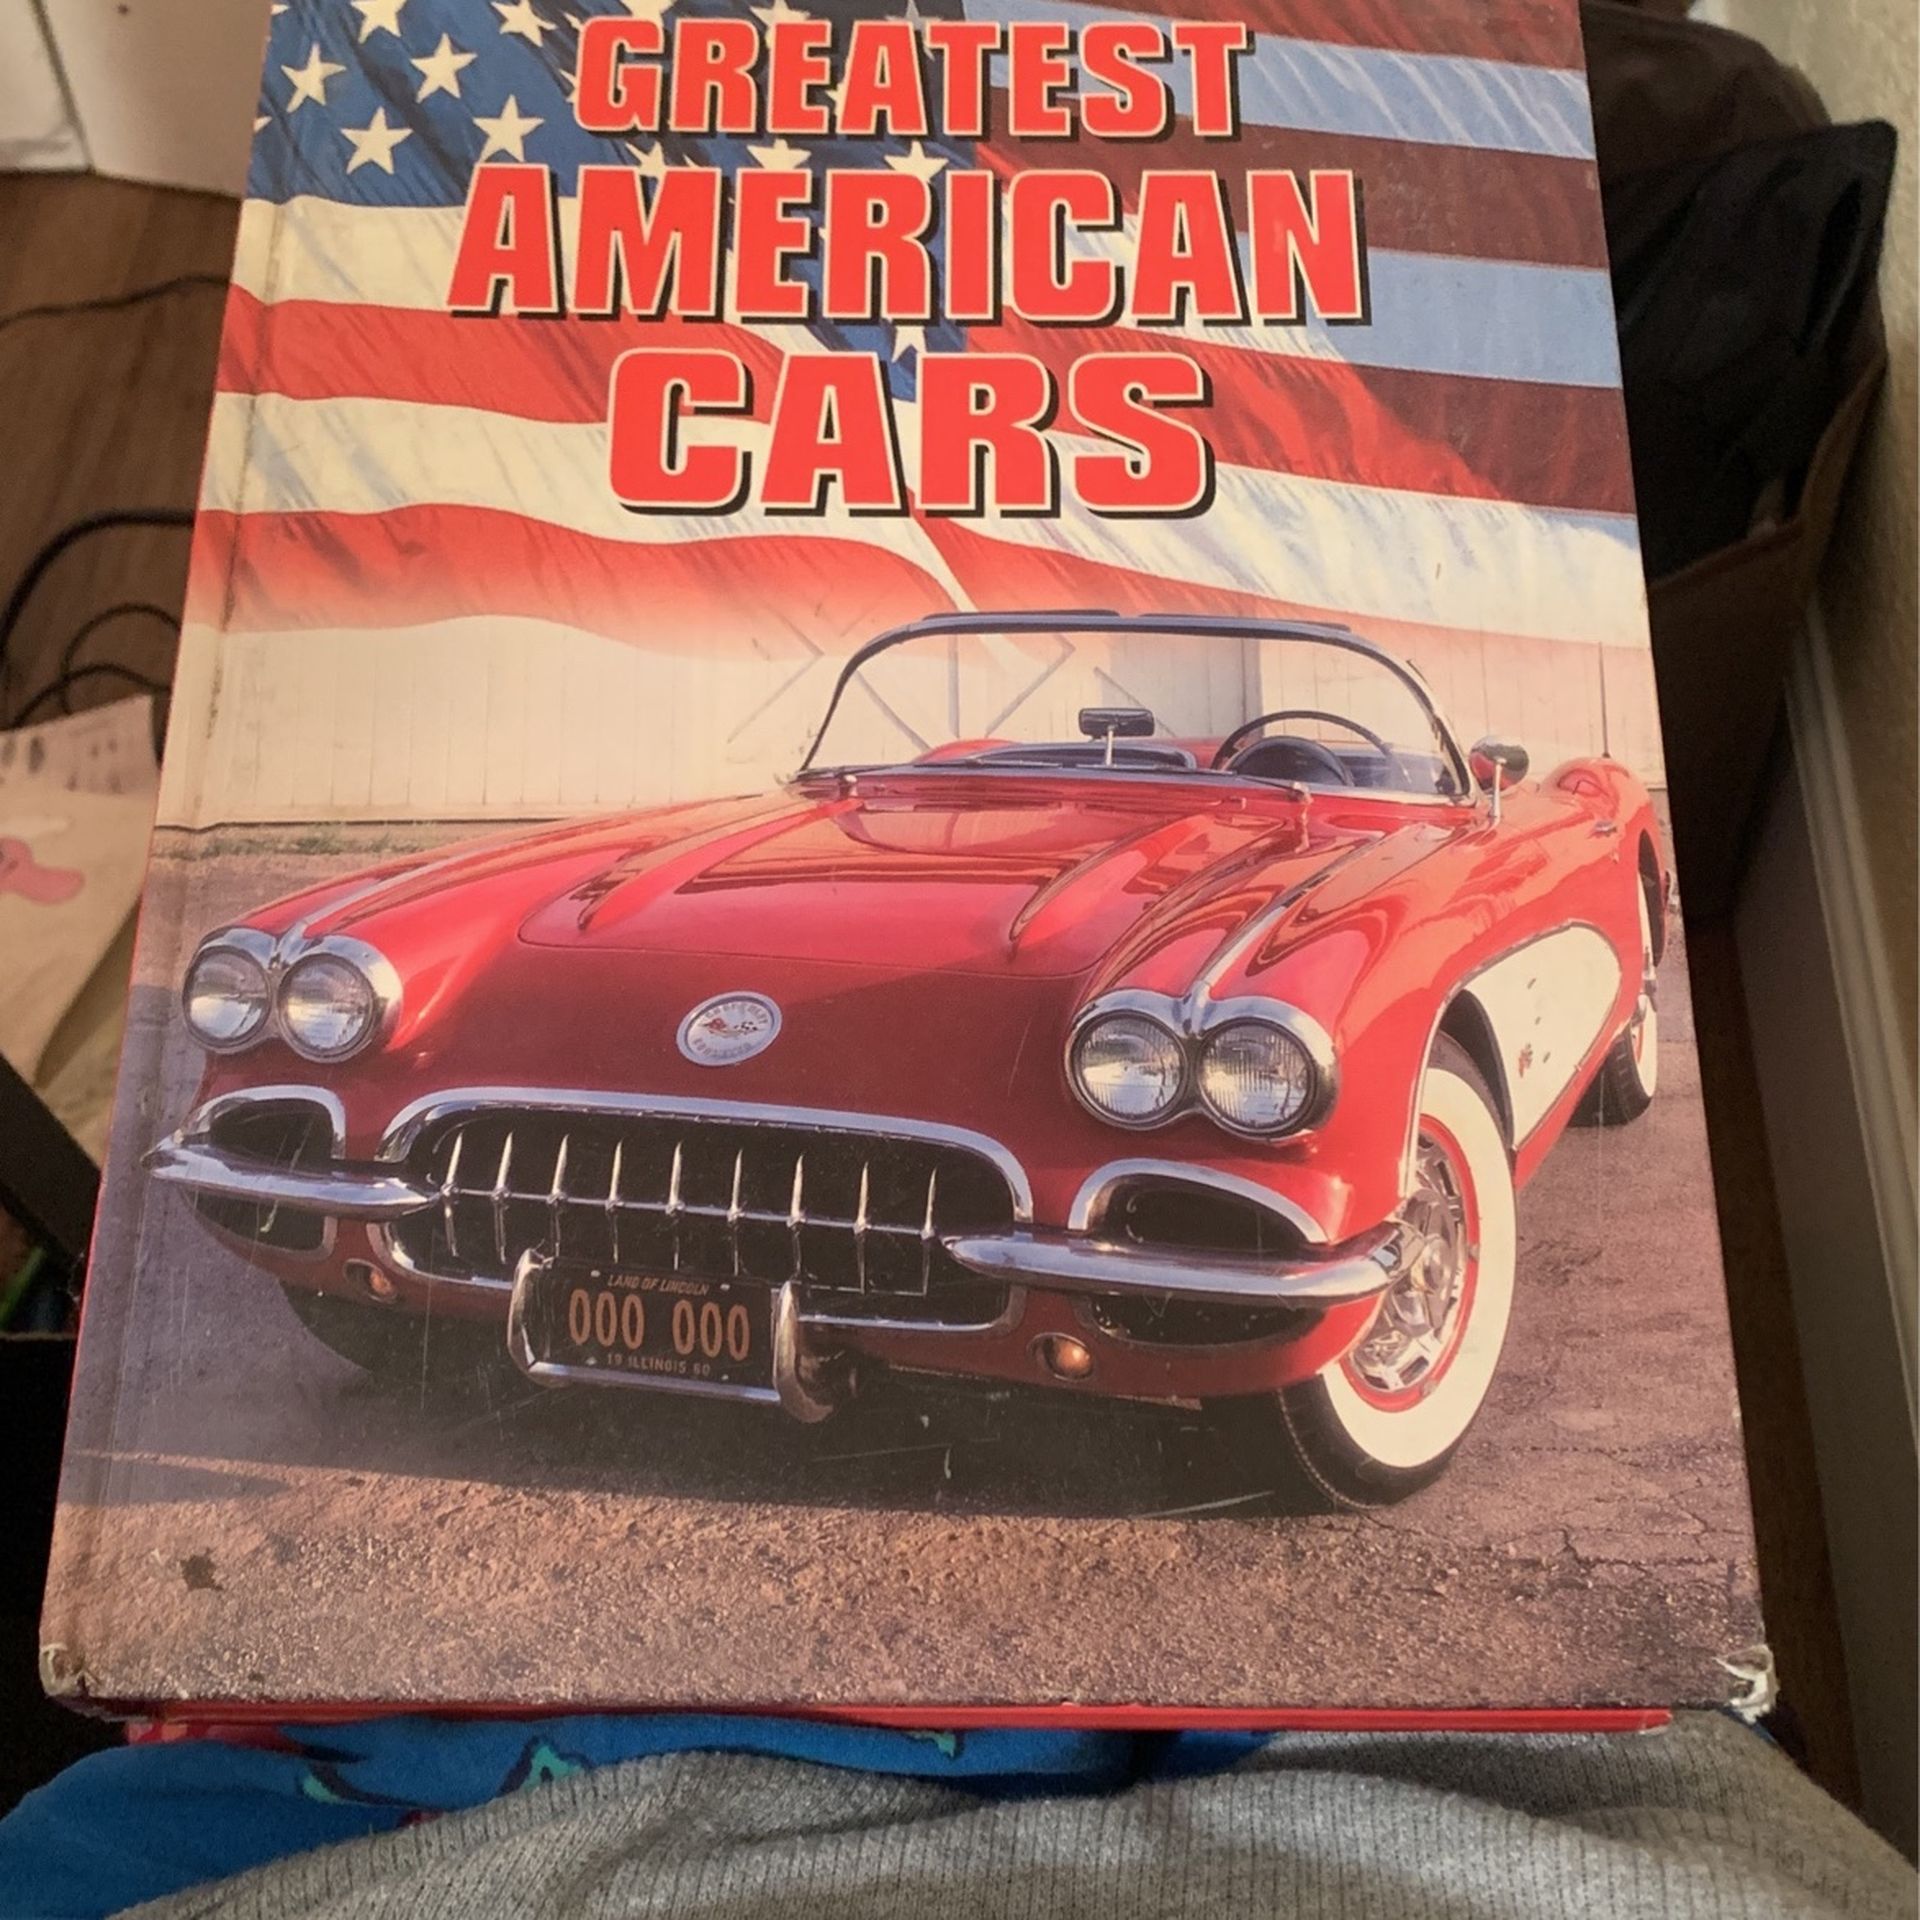 12” By 9” Great American Cars Book.